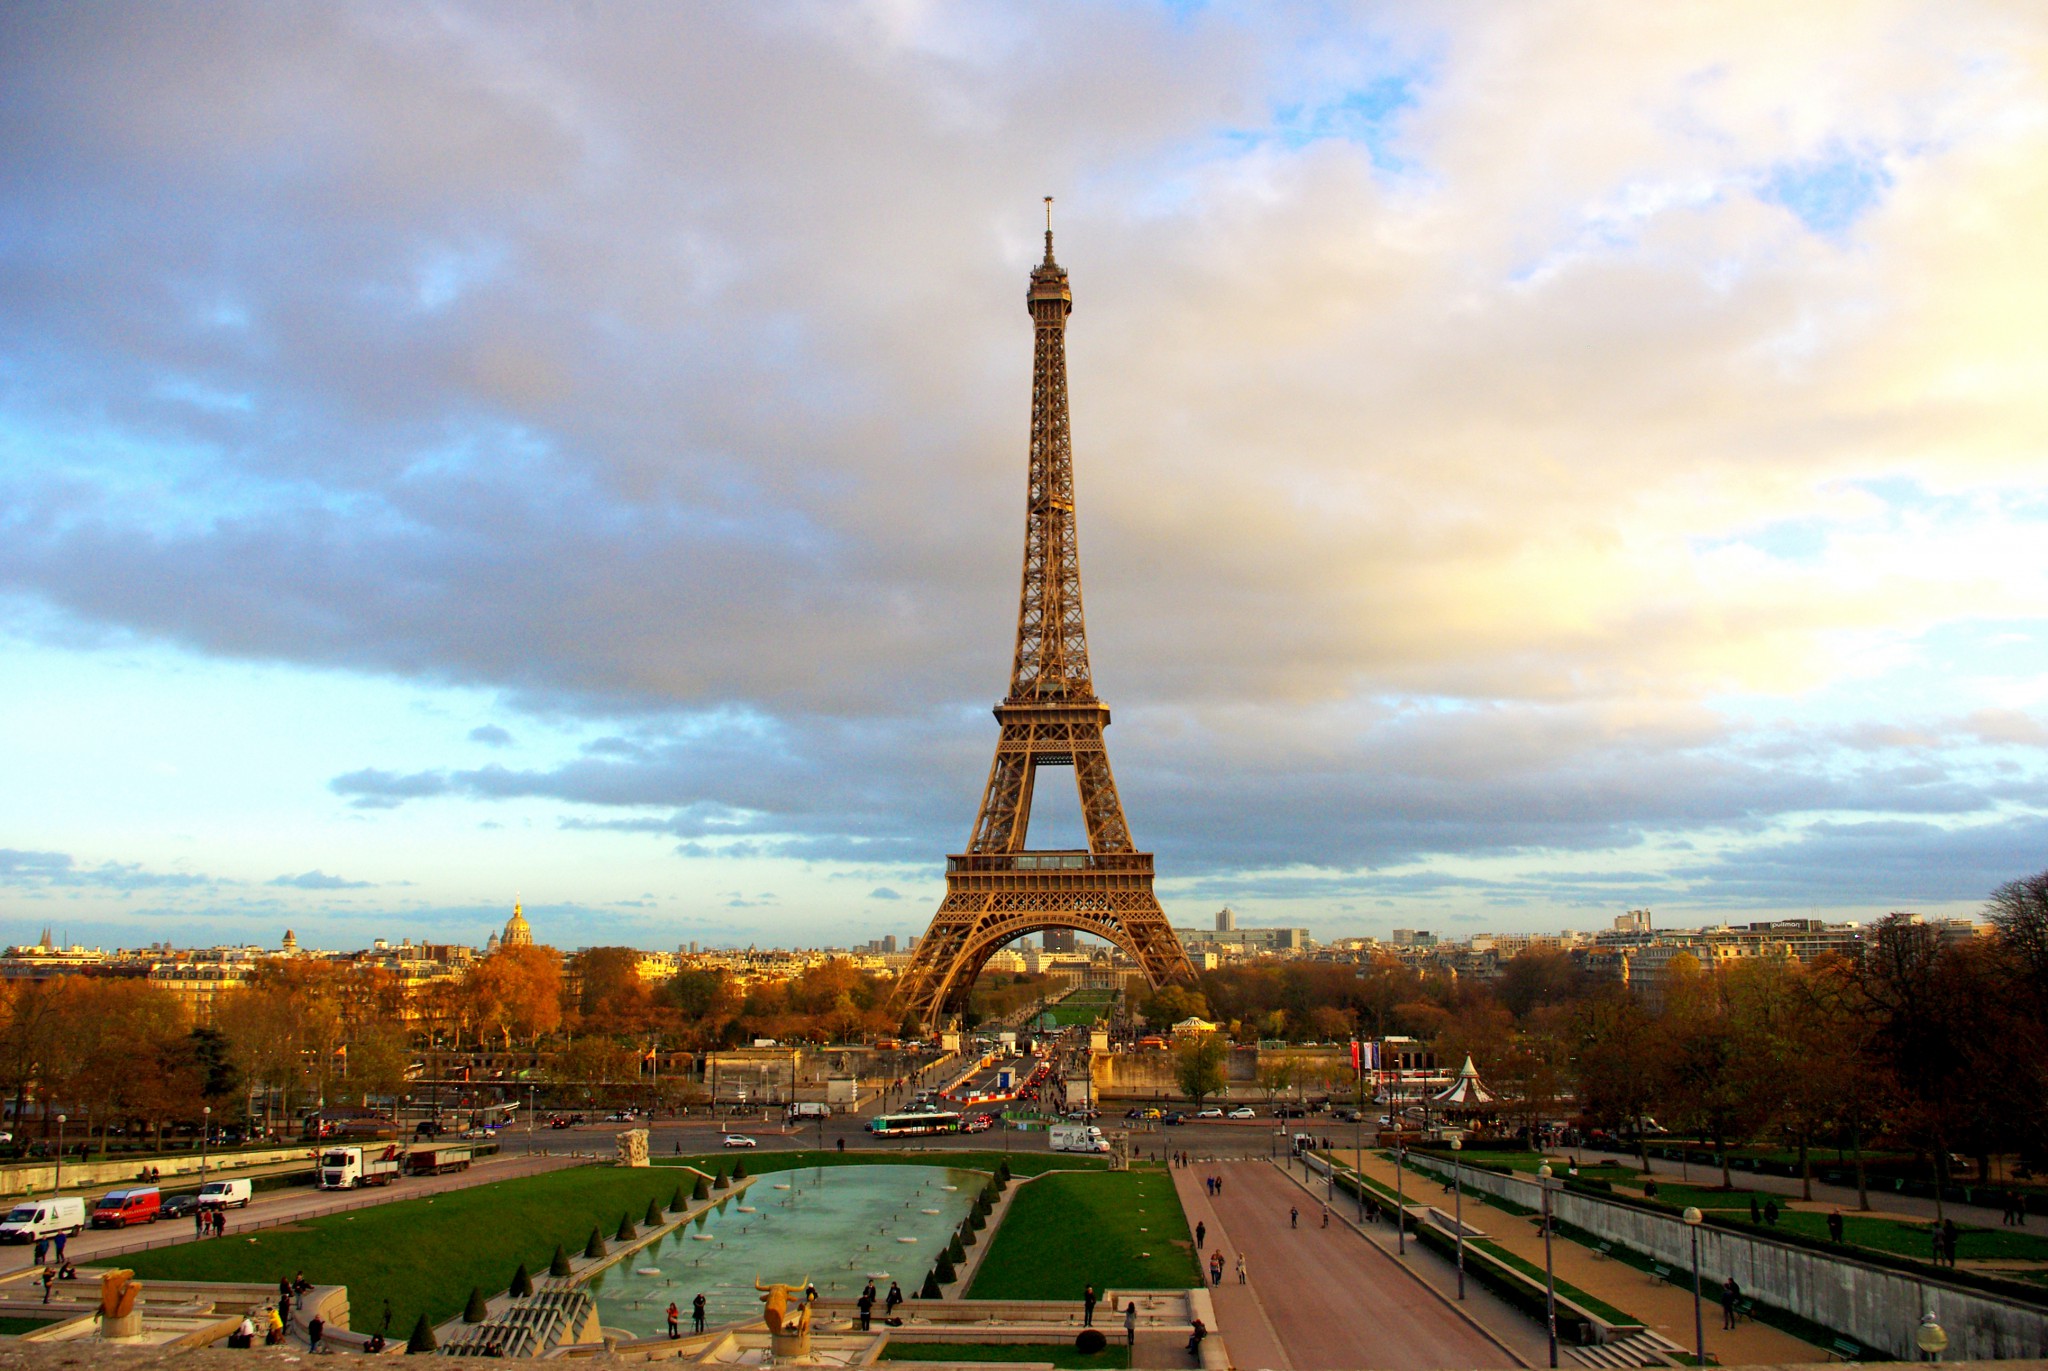 Eiffel Tower Facts - 10 Fun Facts about the Eiffel Tower - Interesting Facts